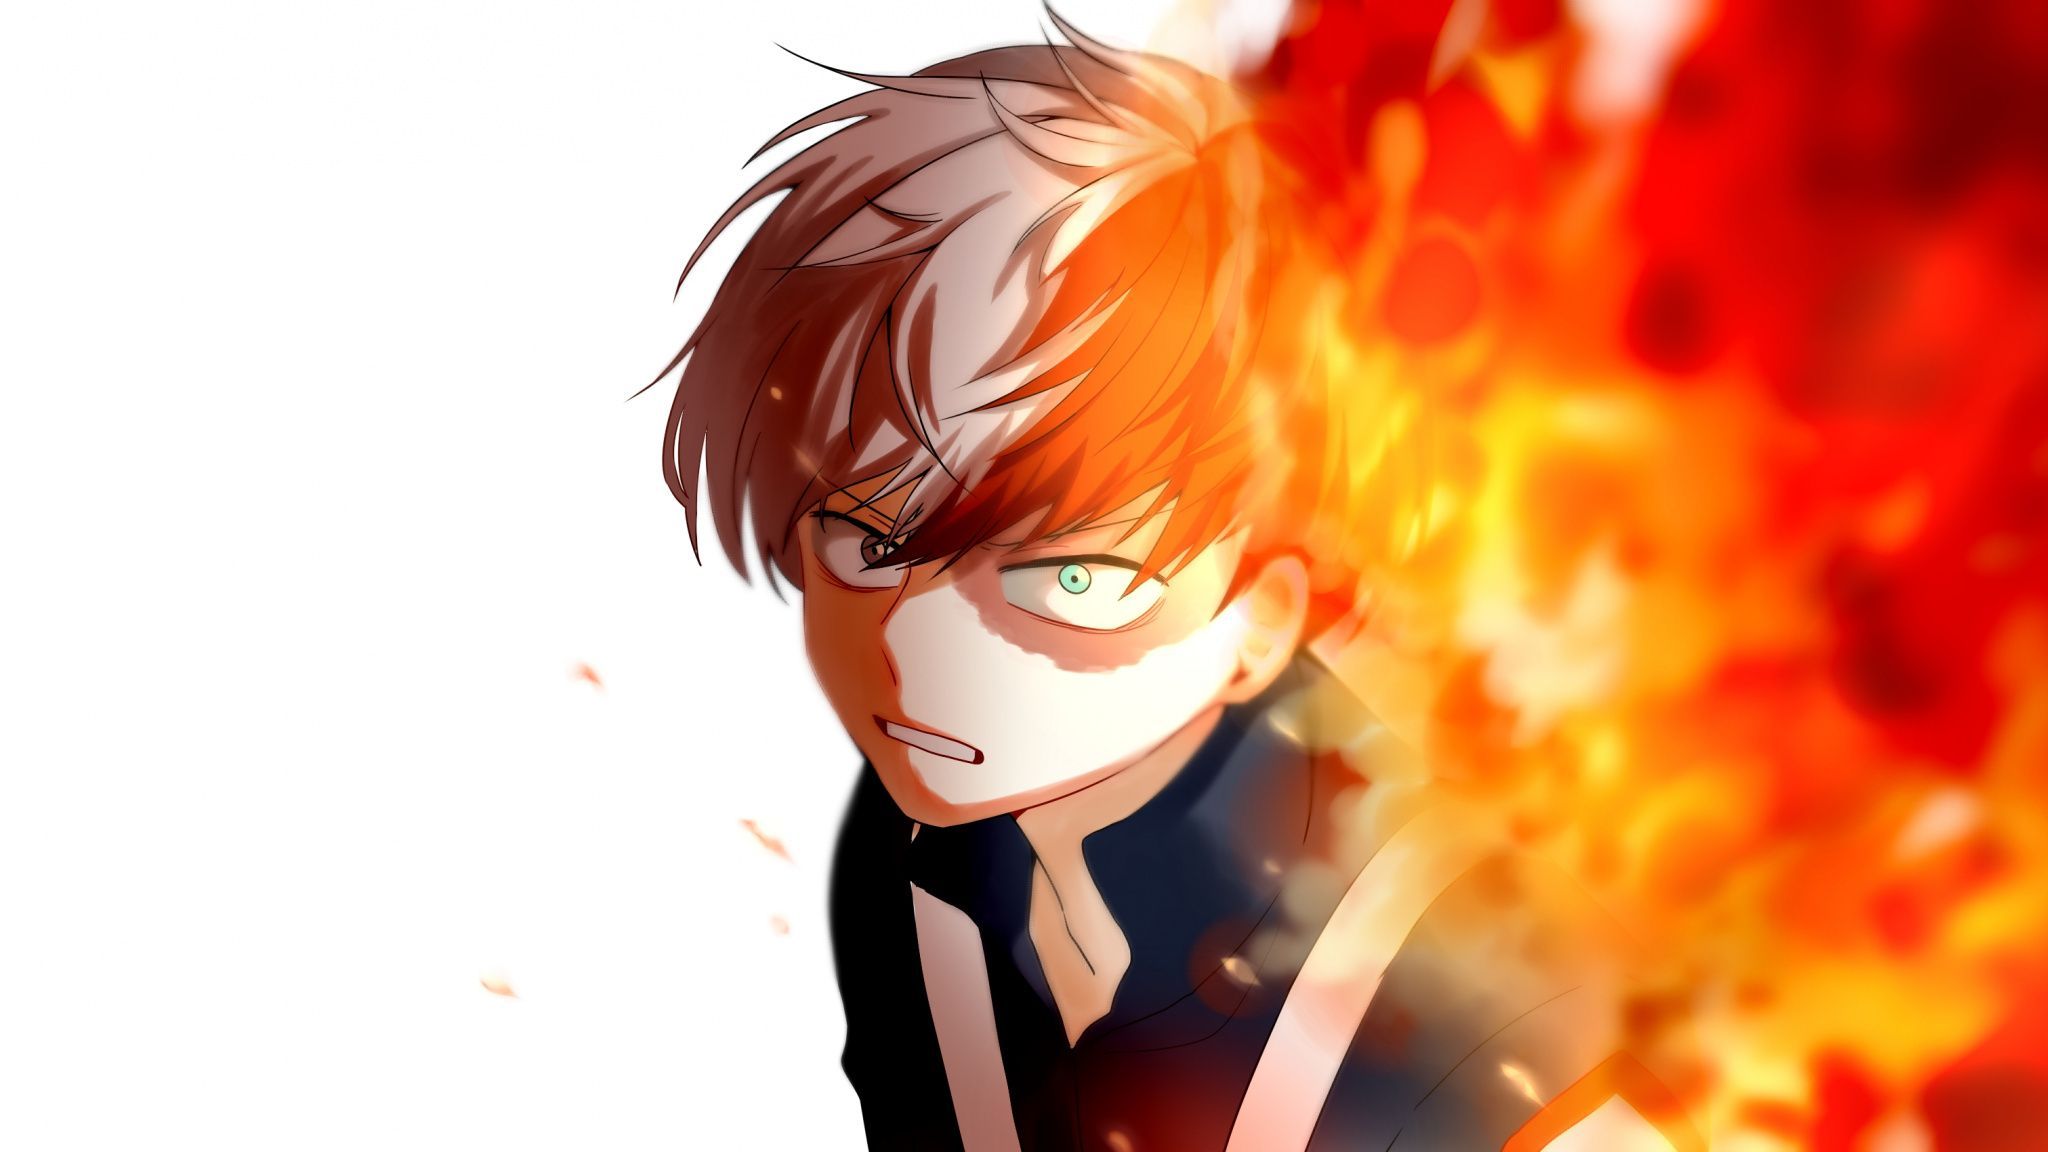 Fire Anime Wallpaper Free 2048X1152 Fire Anime Background